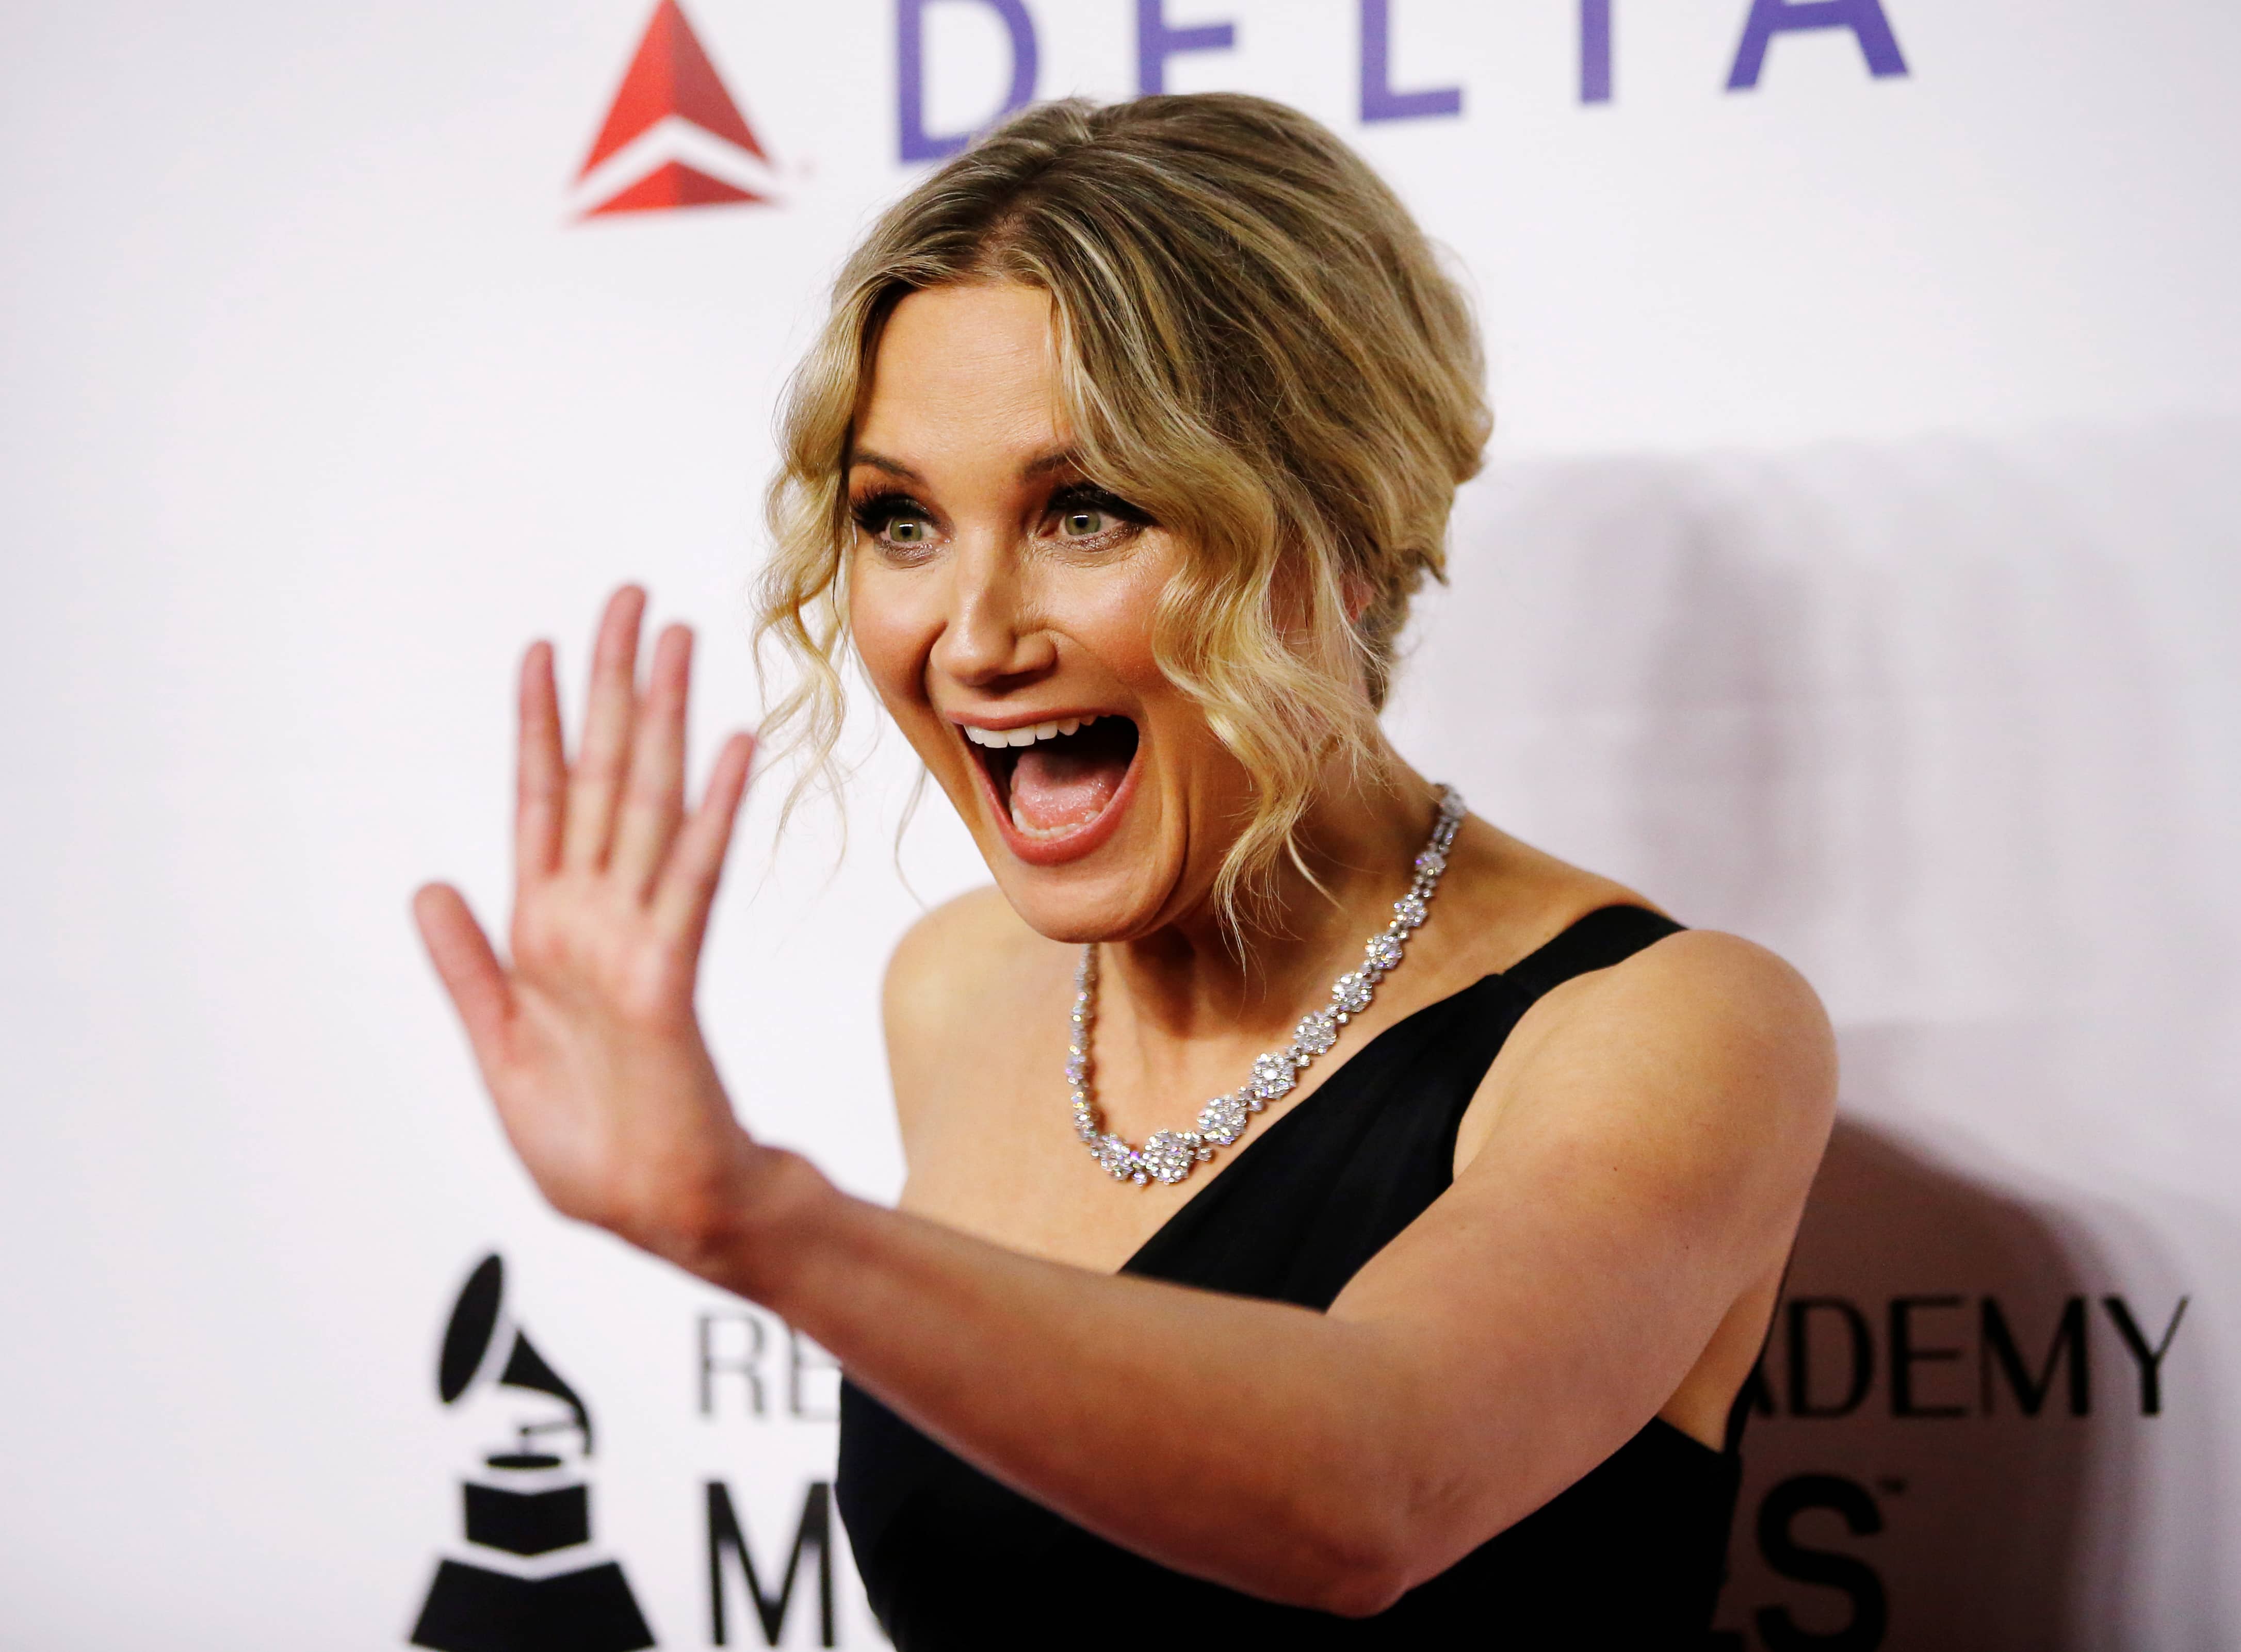 singer-jennifer-nettles-attend-a-red-carpet-gala-event-honoring-dolly-parton-as-the-musicares-person-of-the-year-ahead-of-the-grammy-awards-in-los-angeles-california